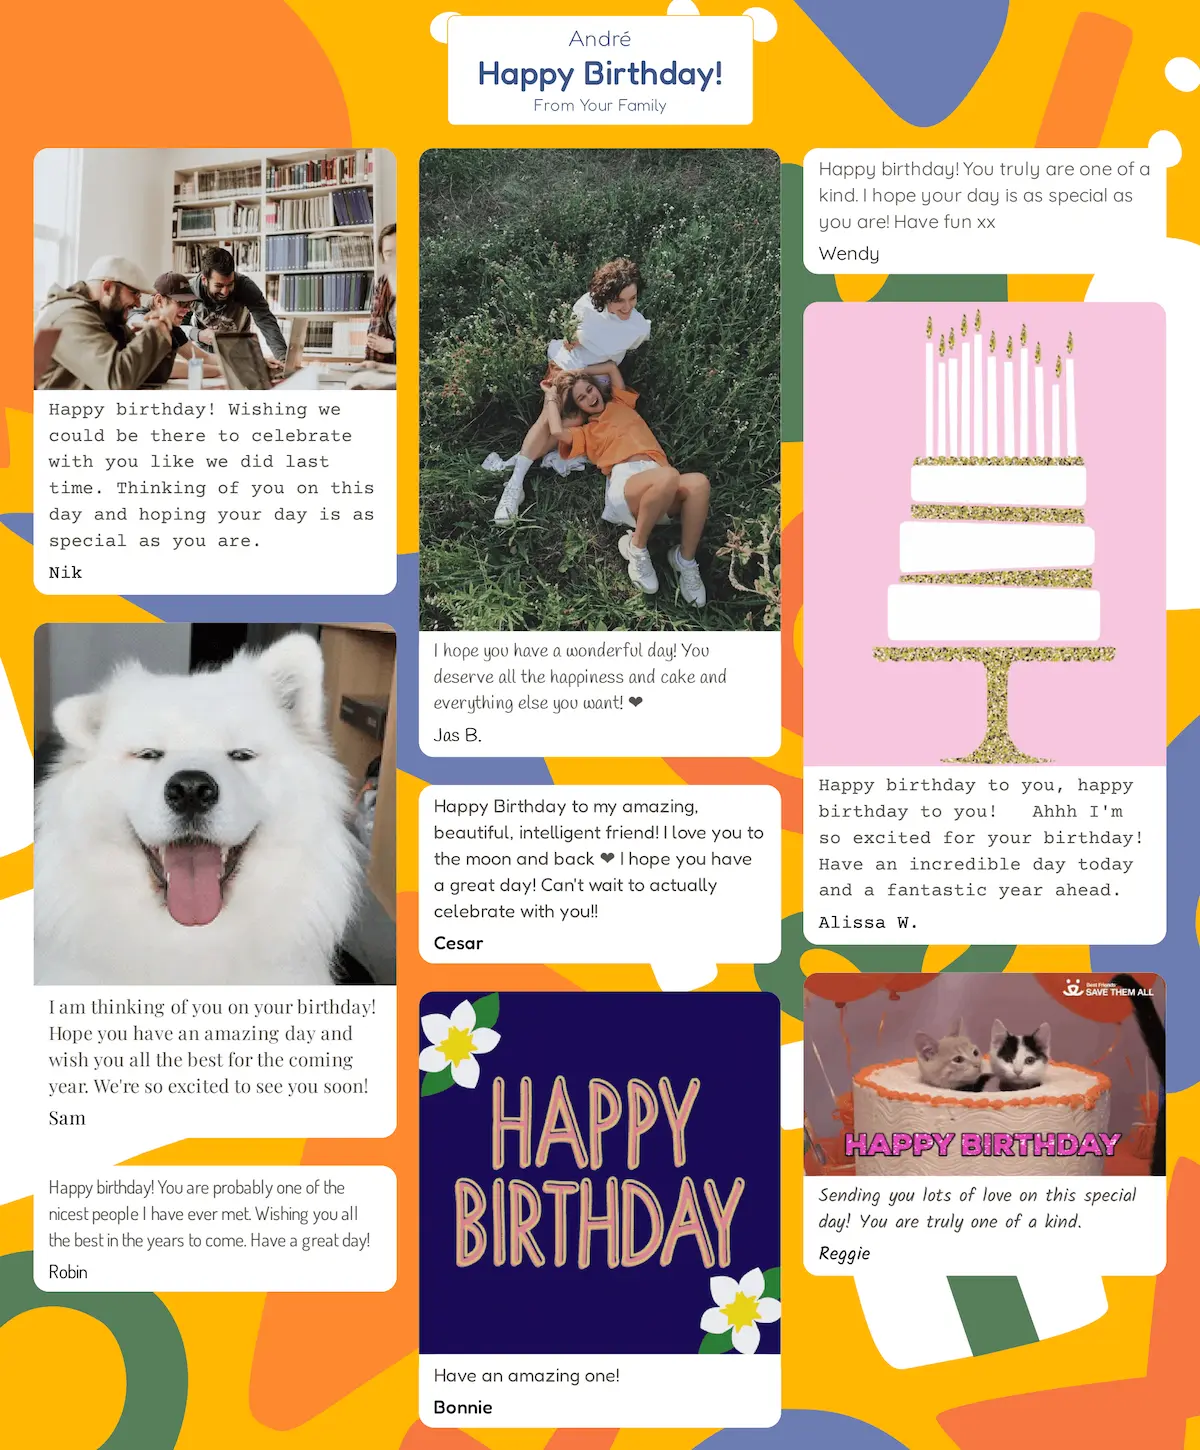 Group ecard for your brother's birthday